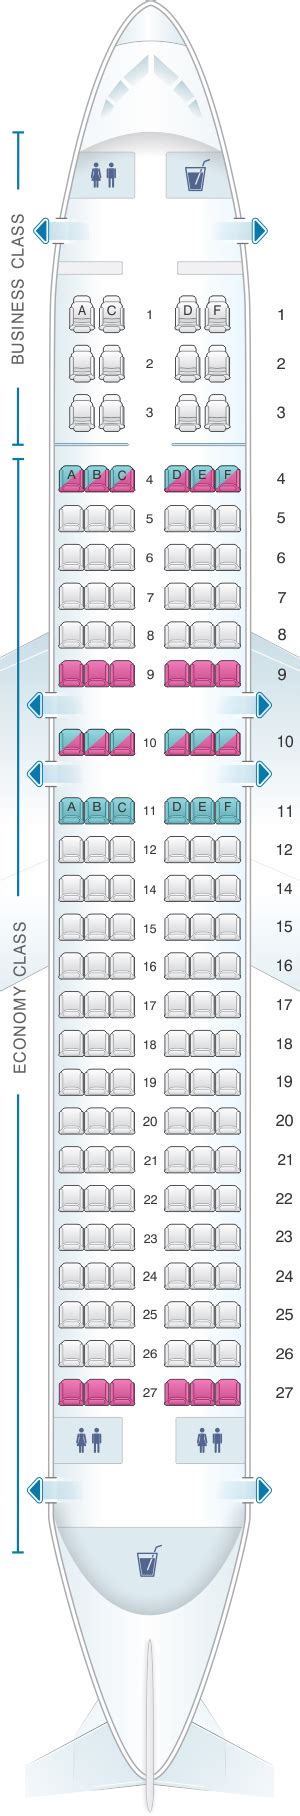 Seat Map Avianca Airbus A320